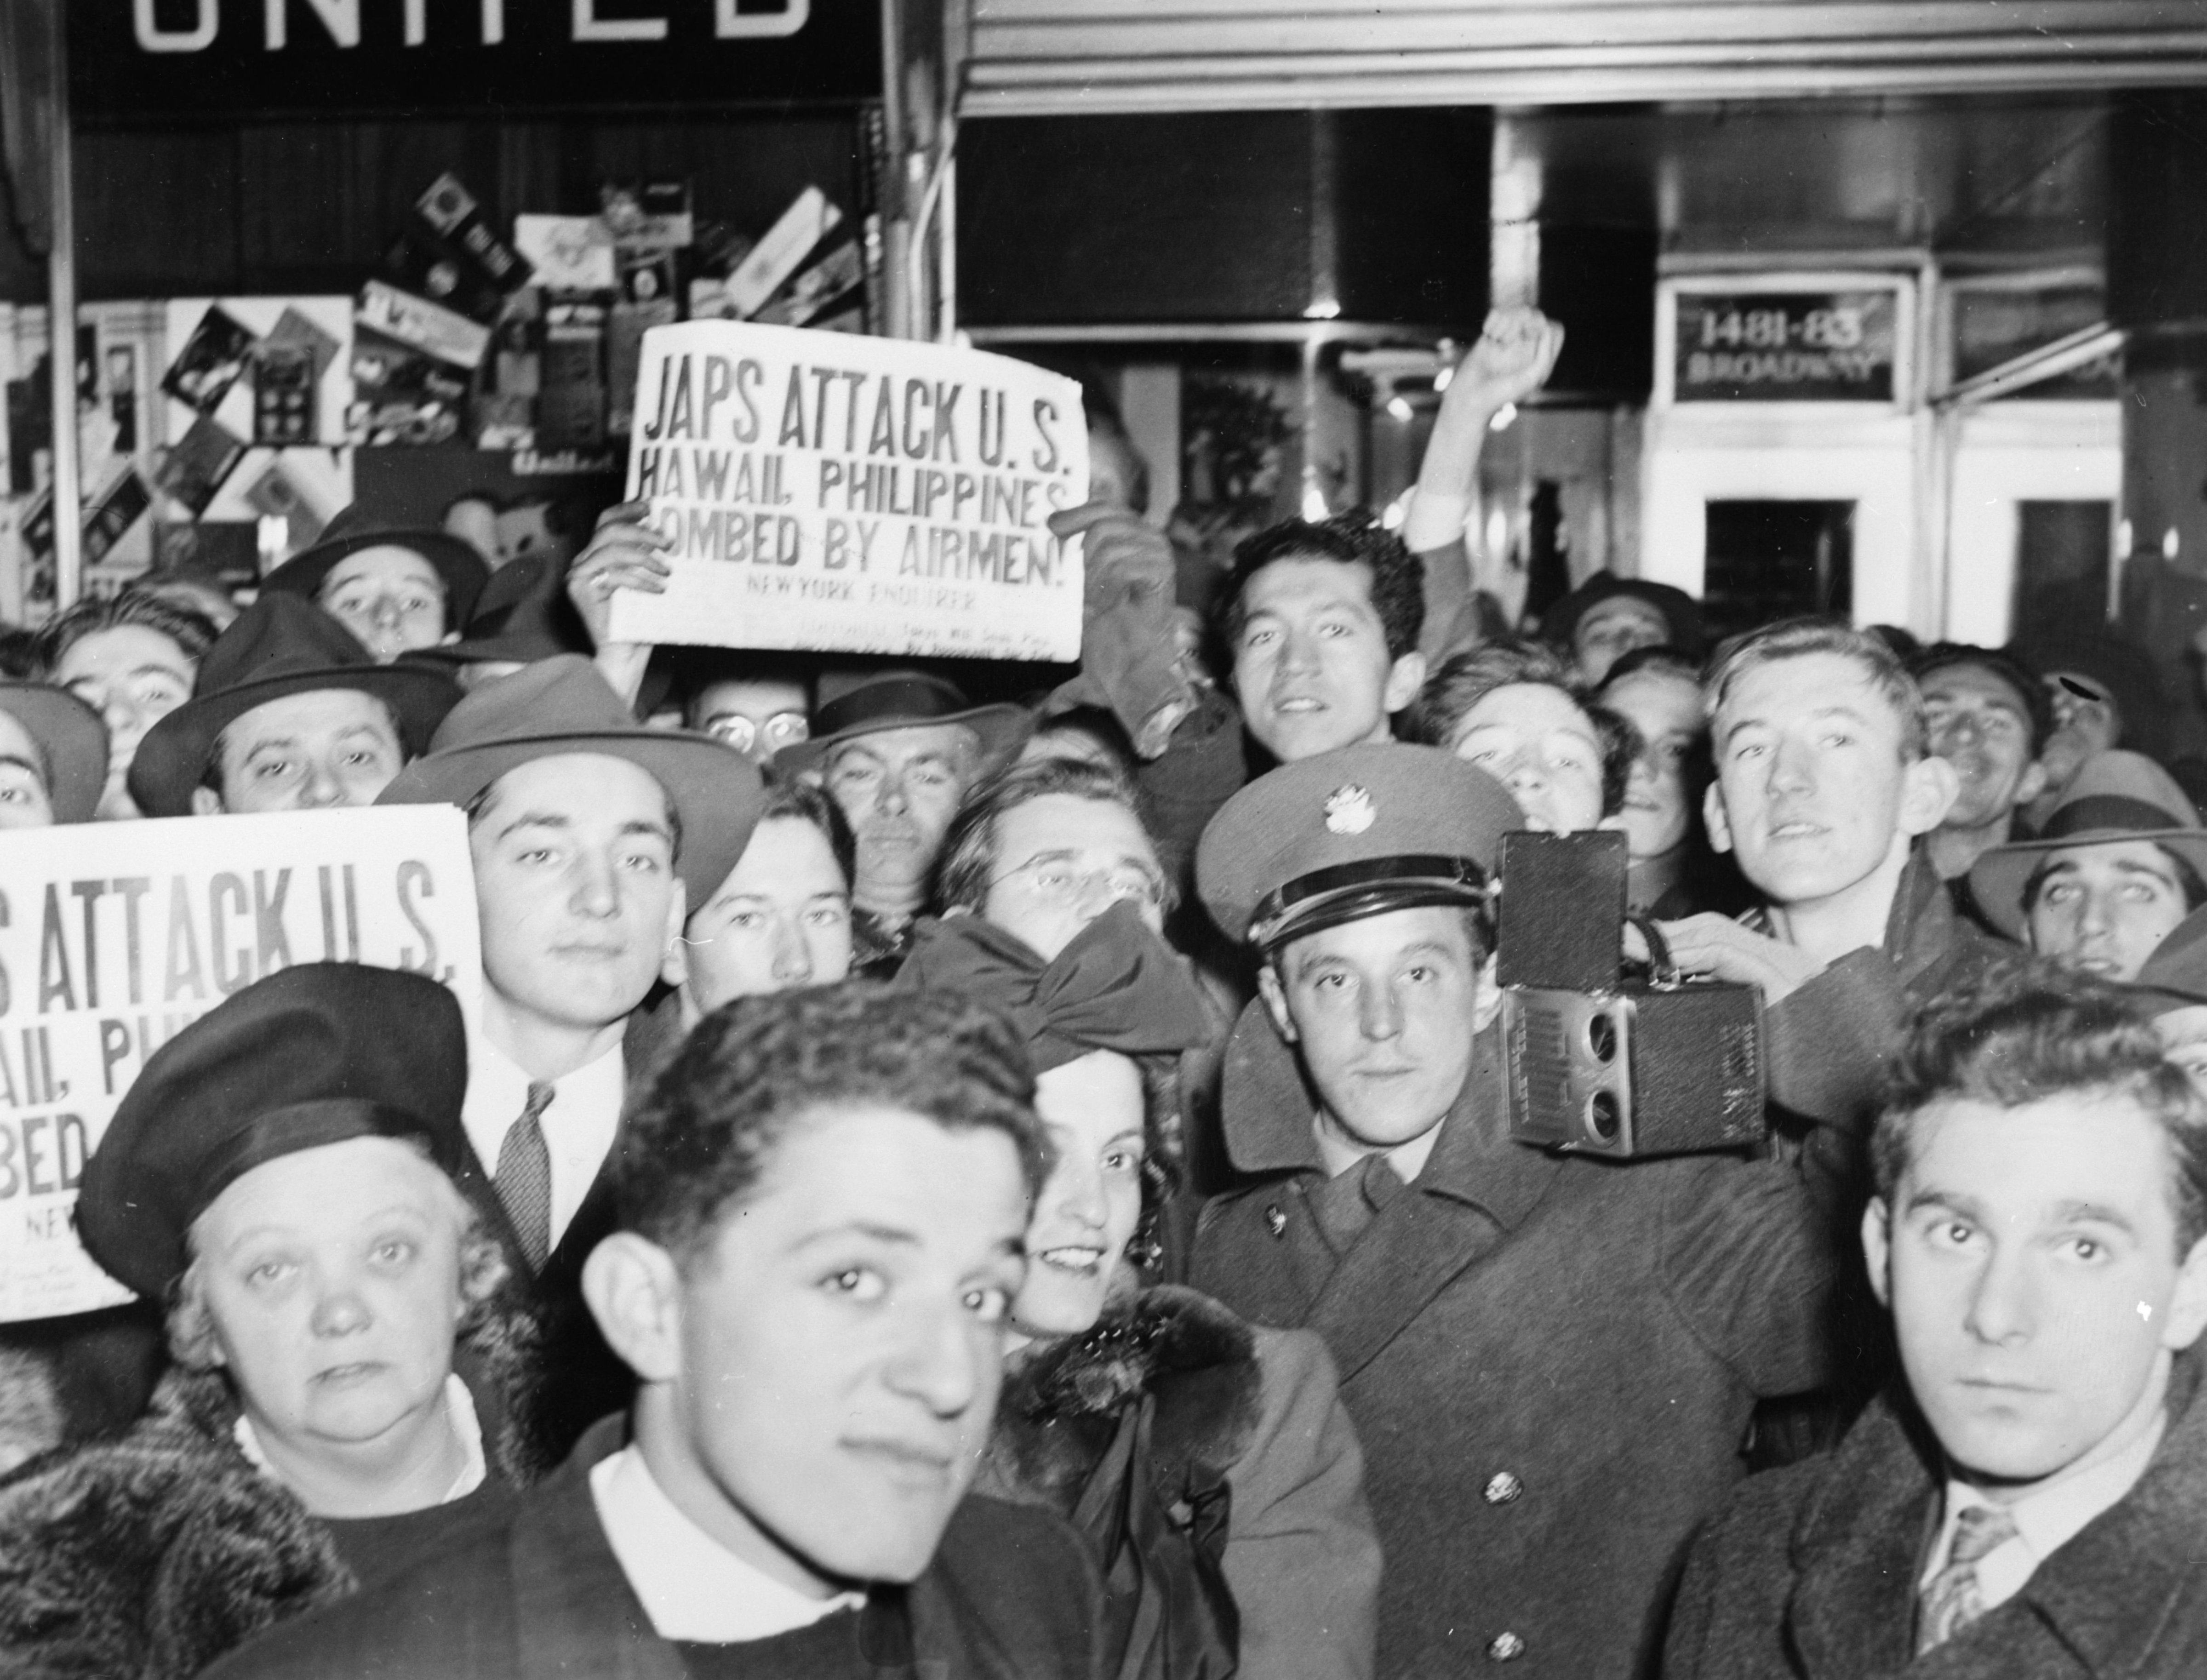 A crowd on Broadway, New York, hold up newspapers announcing the Japanese attack on Pearl Harbor on Dec. 7 1941. (Arthur Fellig—International Center of Photography/Getty Images)